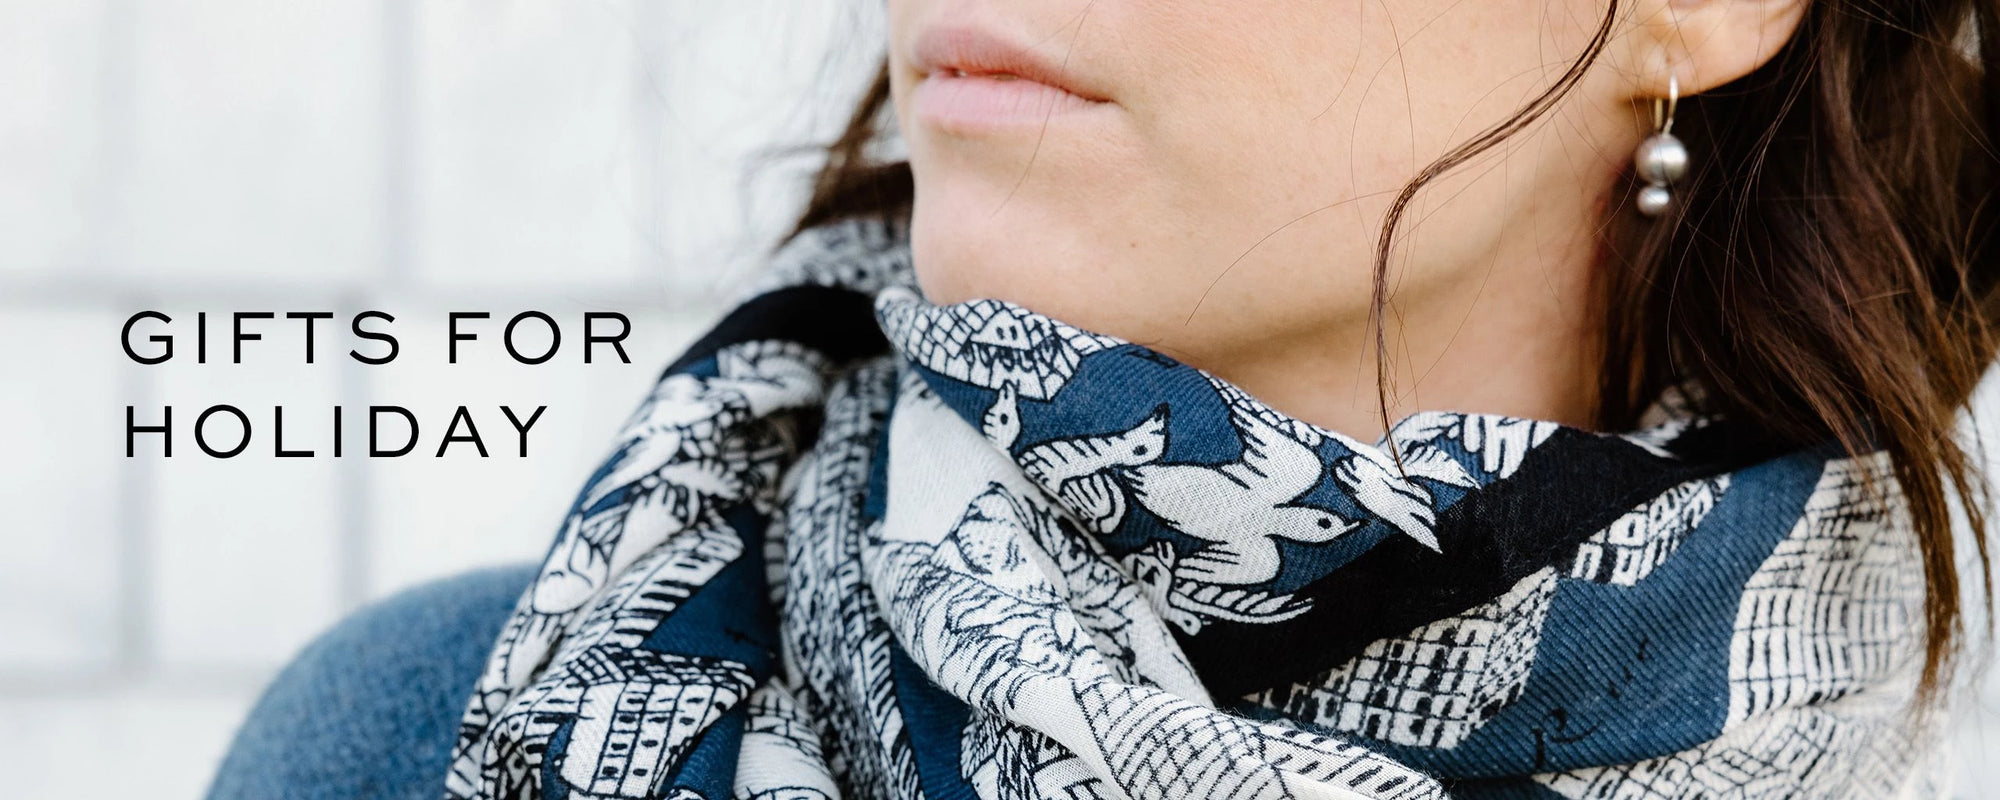 Gifts for Holiday > Scarves